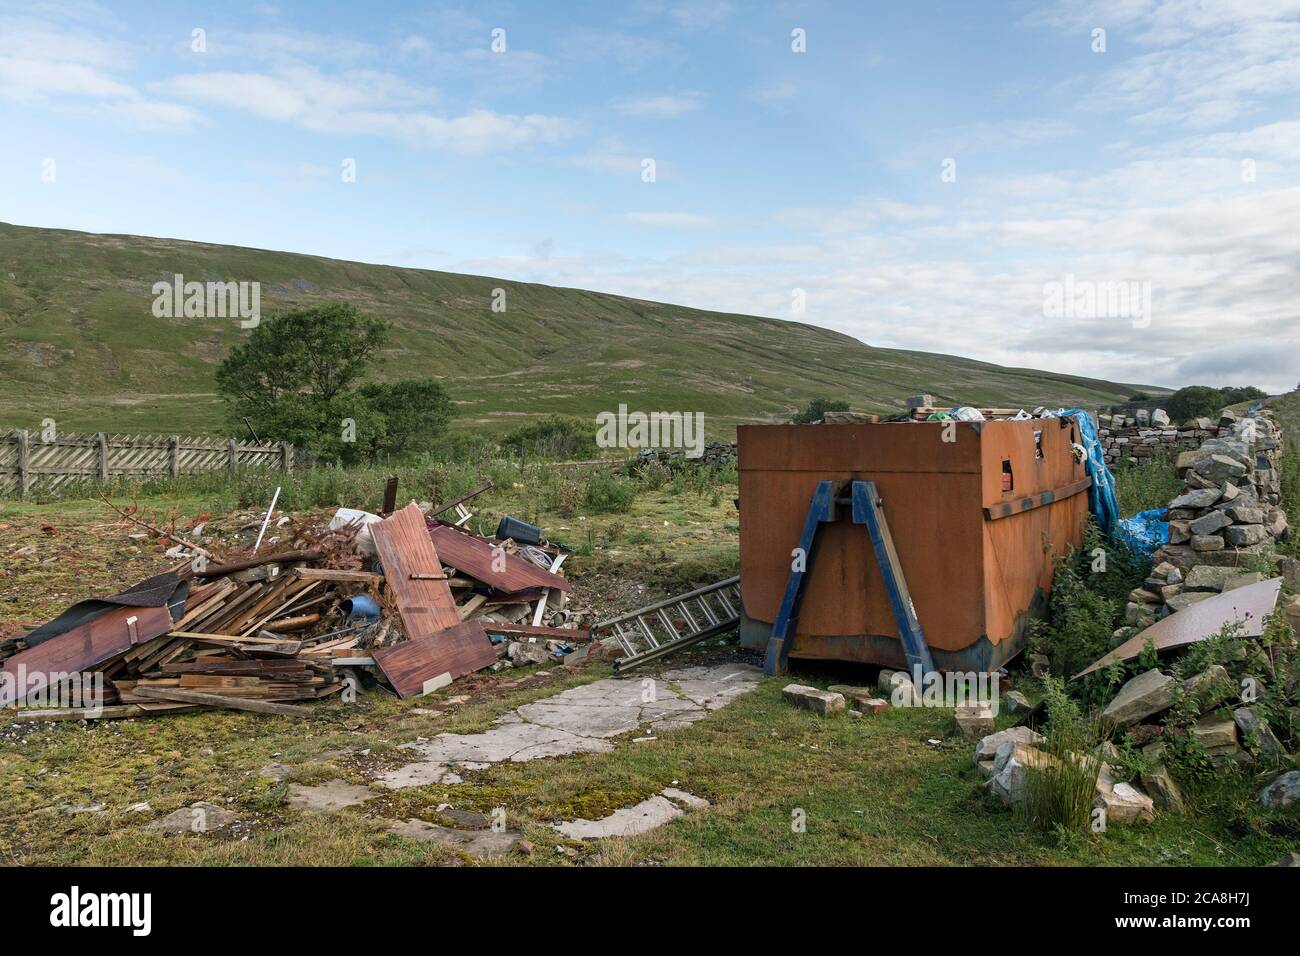 Overflowing Skip and Rubbish Strewn Around Next to the Blea Moor Signal Box Railway House, Yorkshire Dales, National Park, Yorkshire, England, UK, Stock Photo